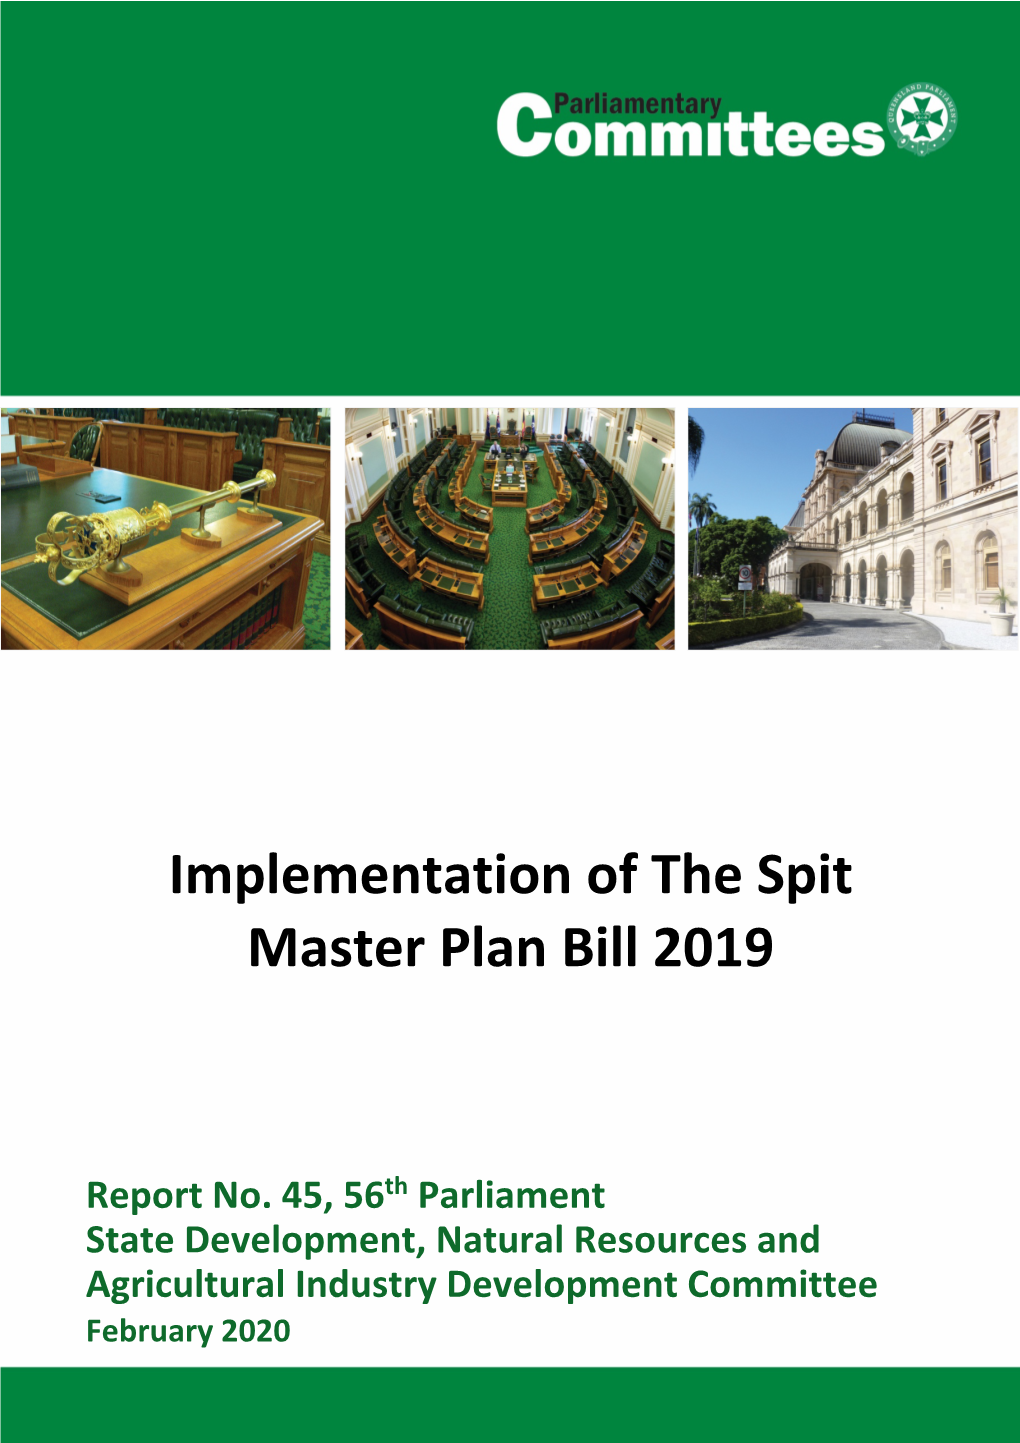 Implementation of the Spit Master Plan Bill 2019